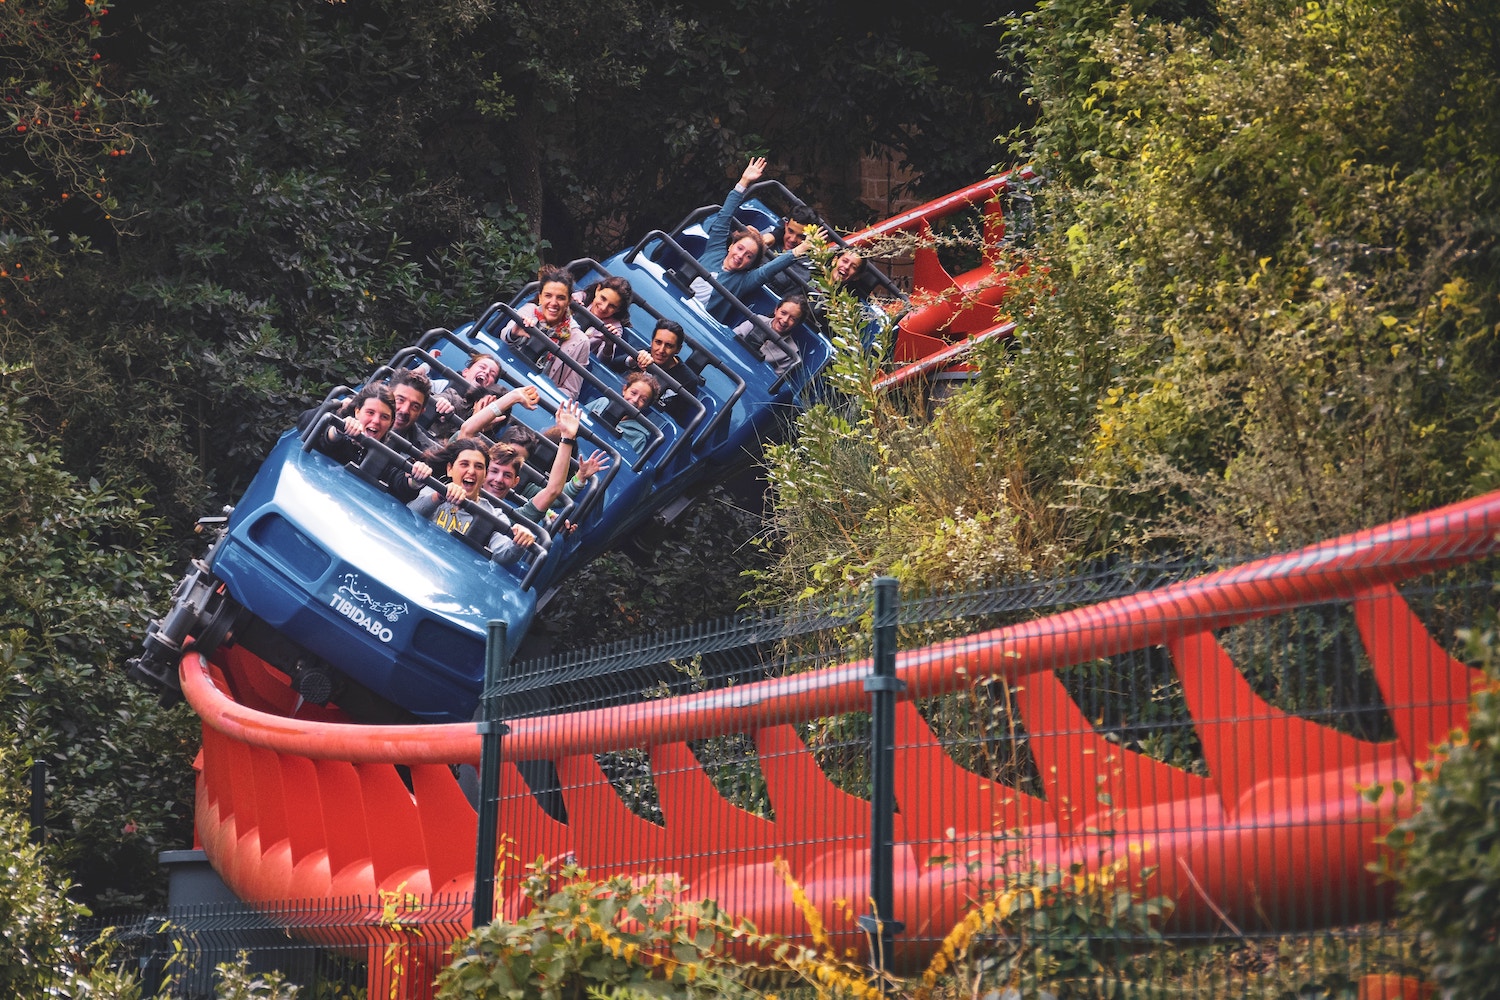 roller coaster image, amusement park photography system, attractions industry